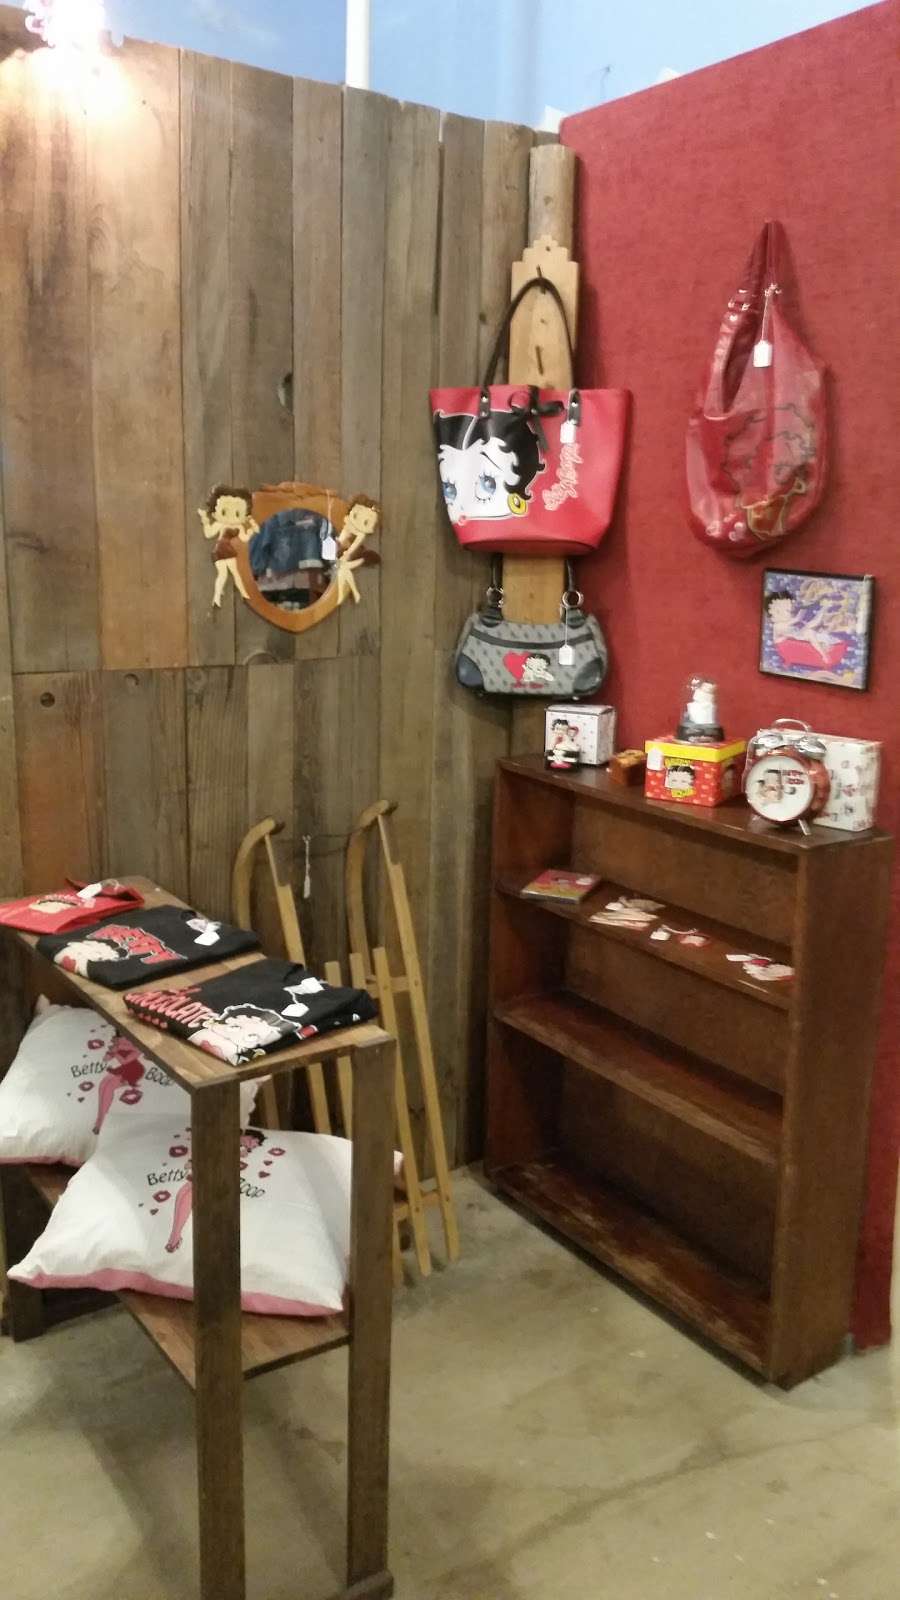 Crafters Village and Wind Toys | 8300 Pearblossom Hwy, Littlerock, CA 93543 | Phone: (661) 361-2108